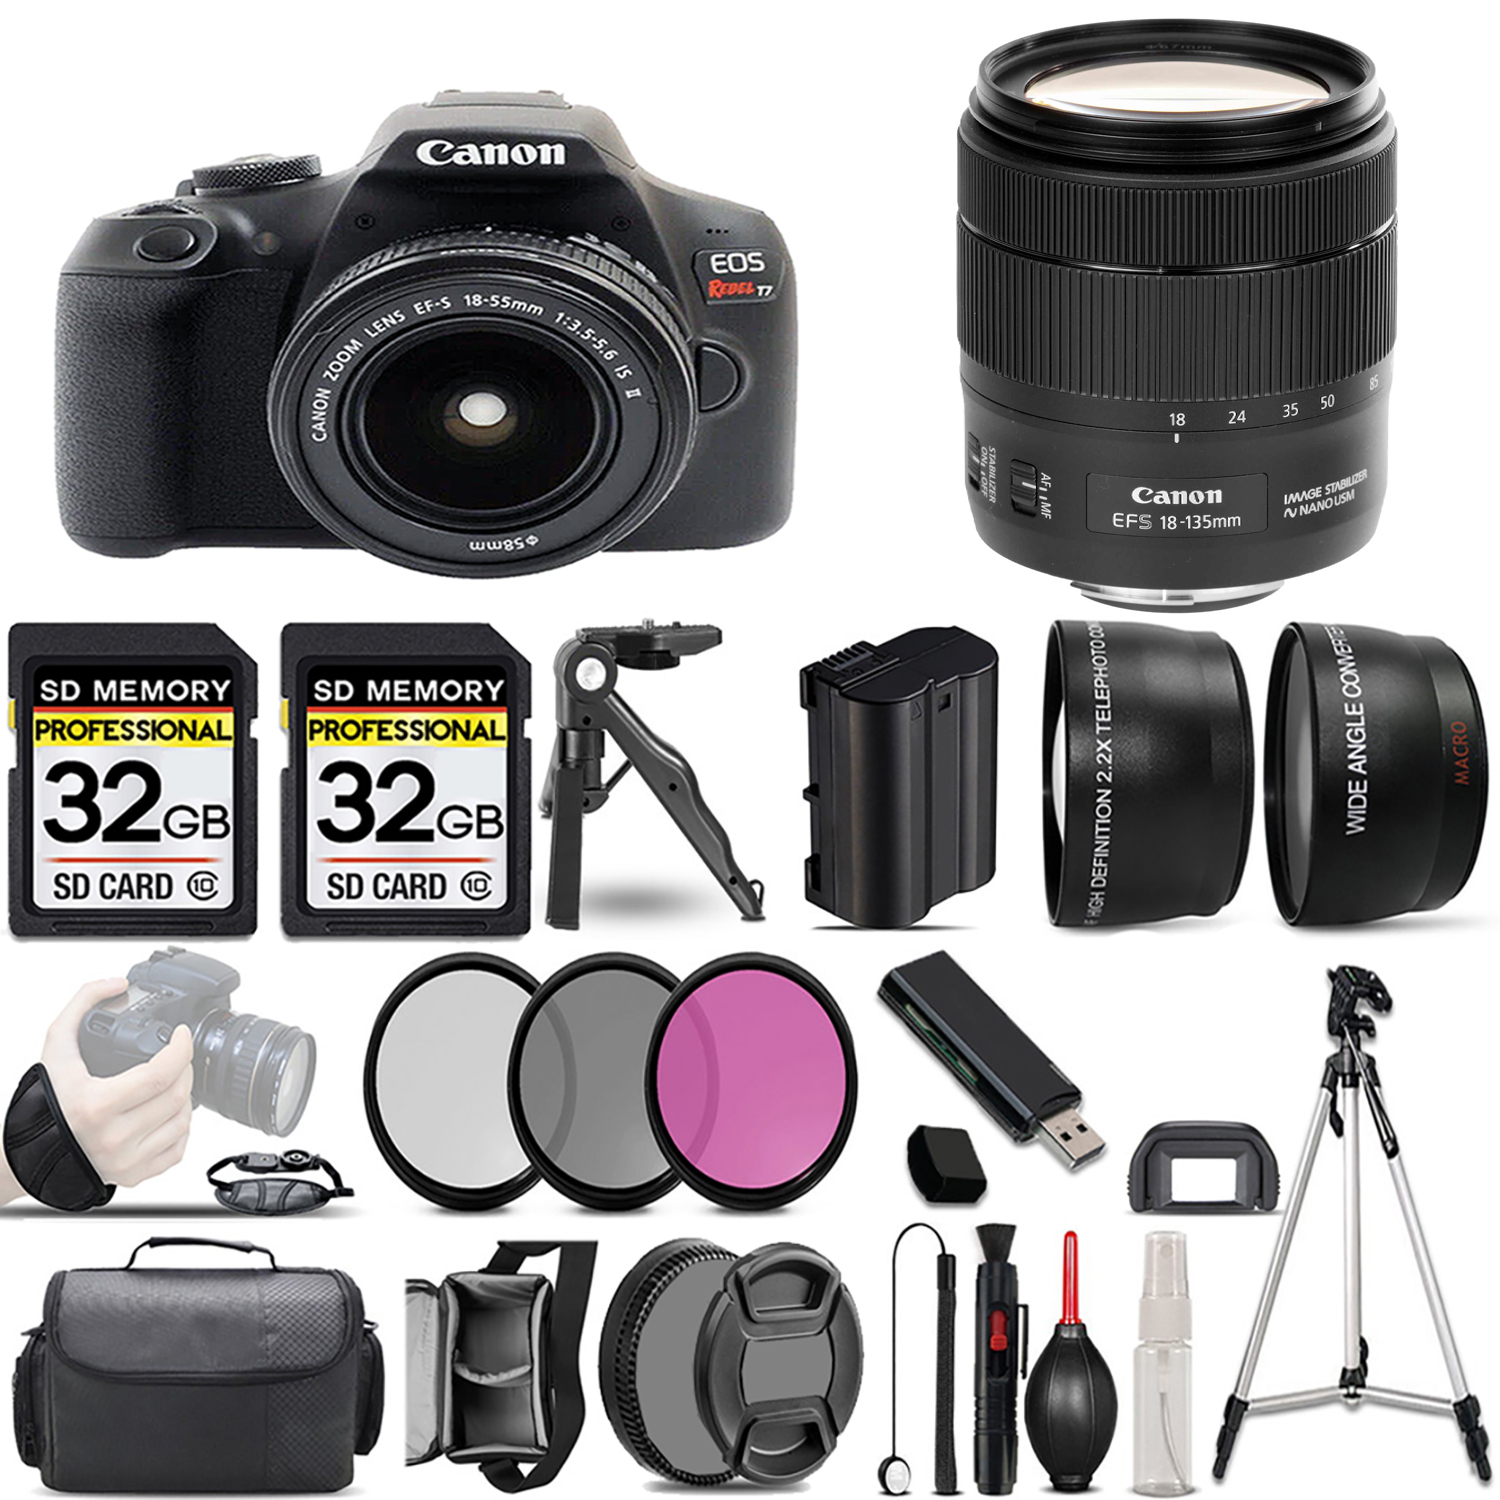 EOS Rebel T7 with 18-55mm Lens + 18-135mm IS USM Lens + 3 Piece Filter Set + 64GB *FREE SHIPPING*